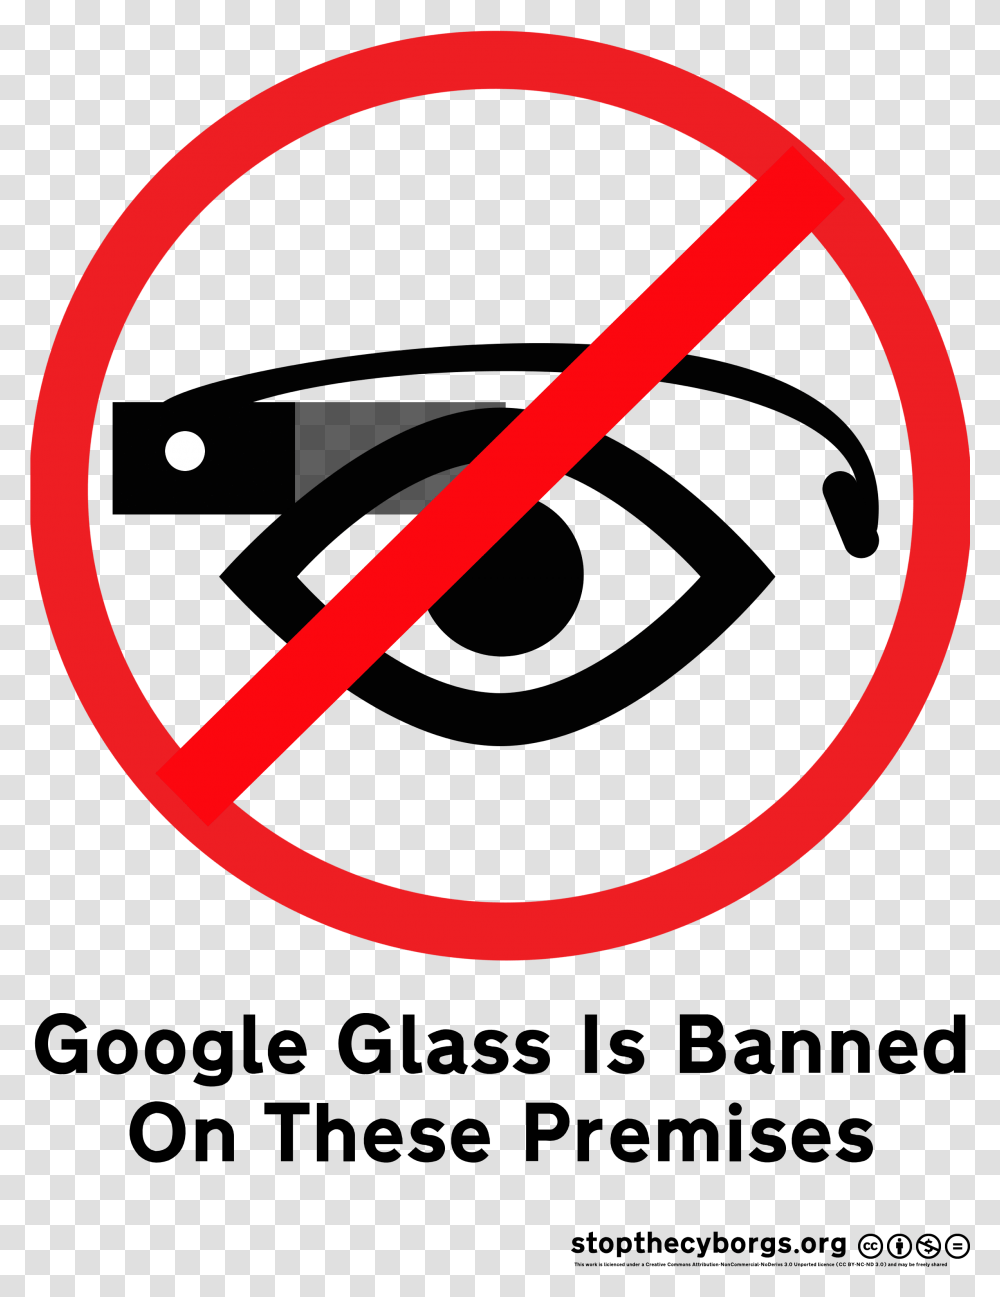 Download Hd Image By Stop The Cyborgs Google Glass Banned Google Glass Privacy Concerns, Symbol, Sign, Armor Transparent Png